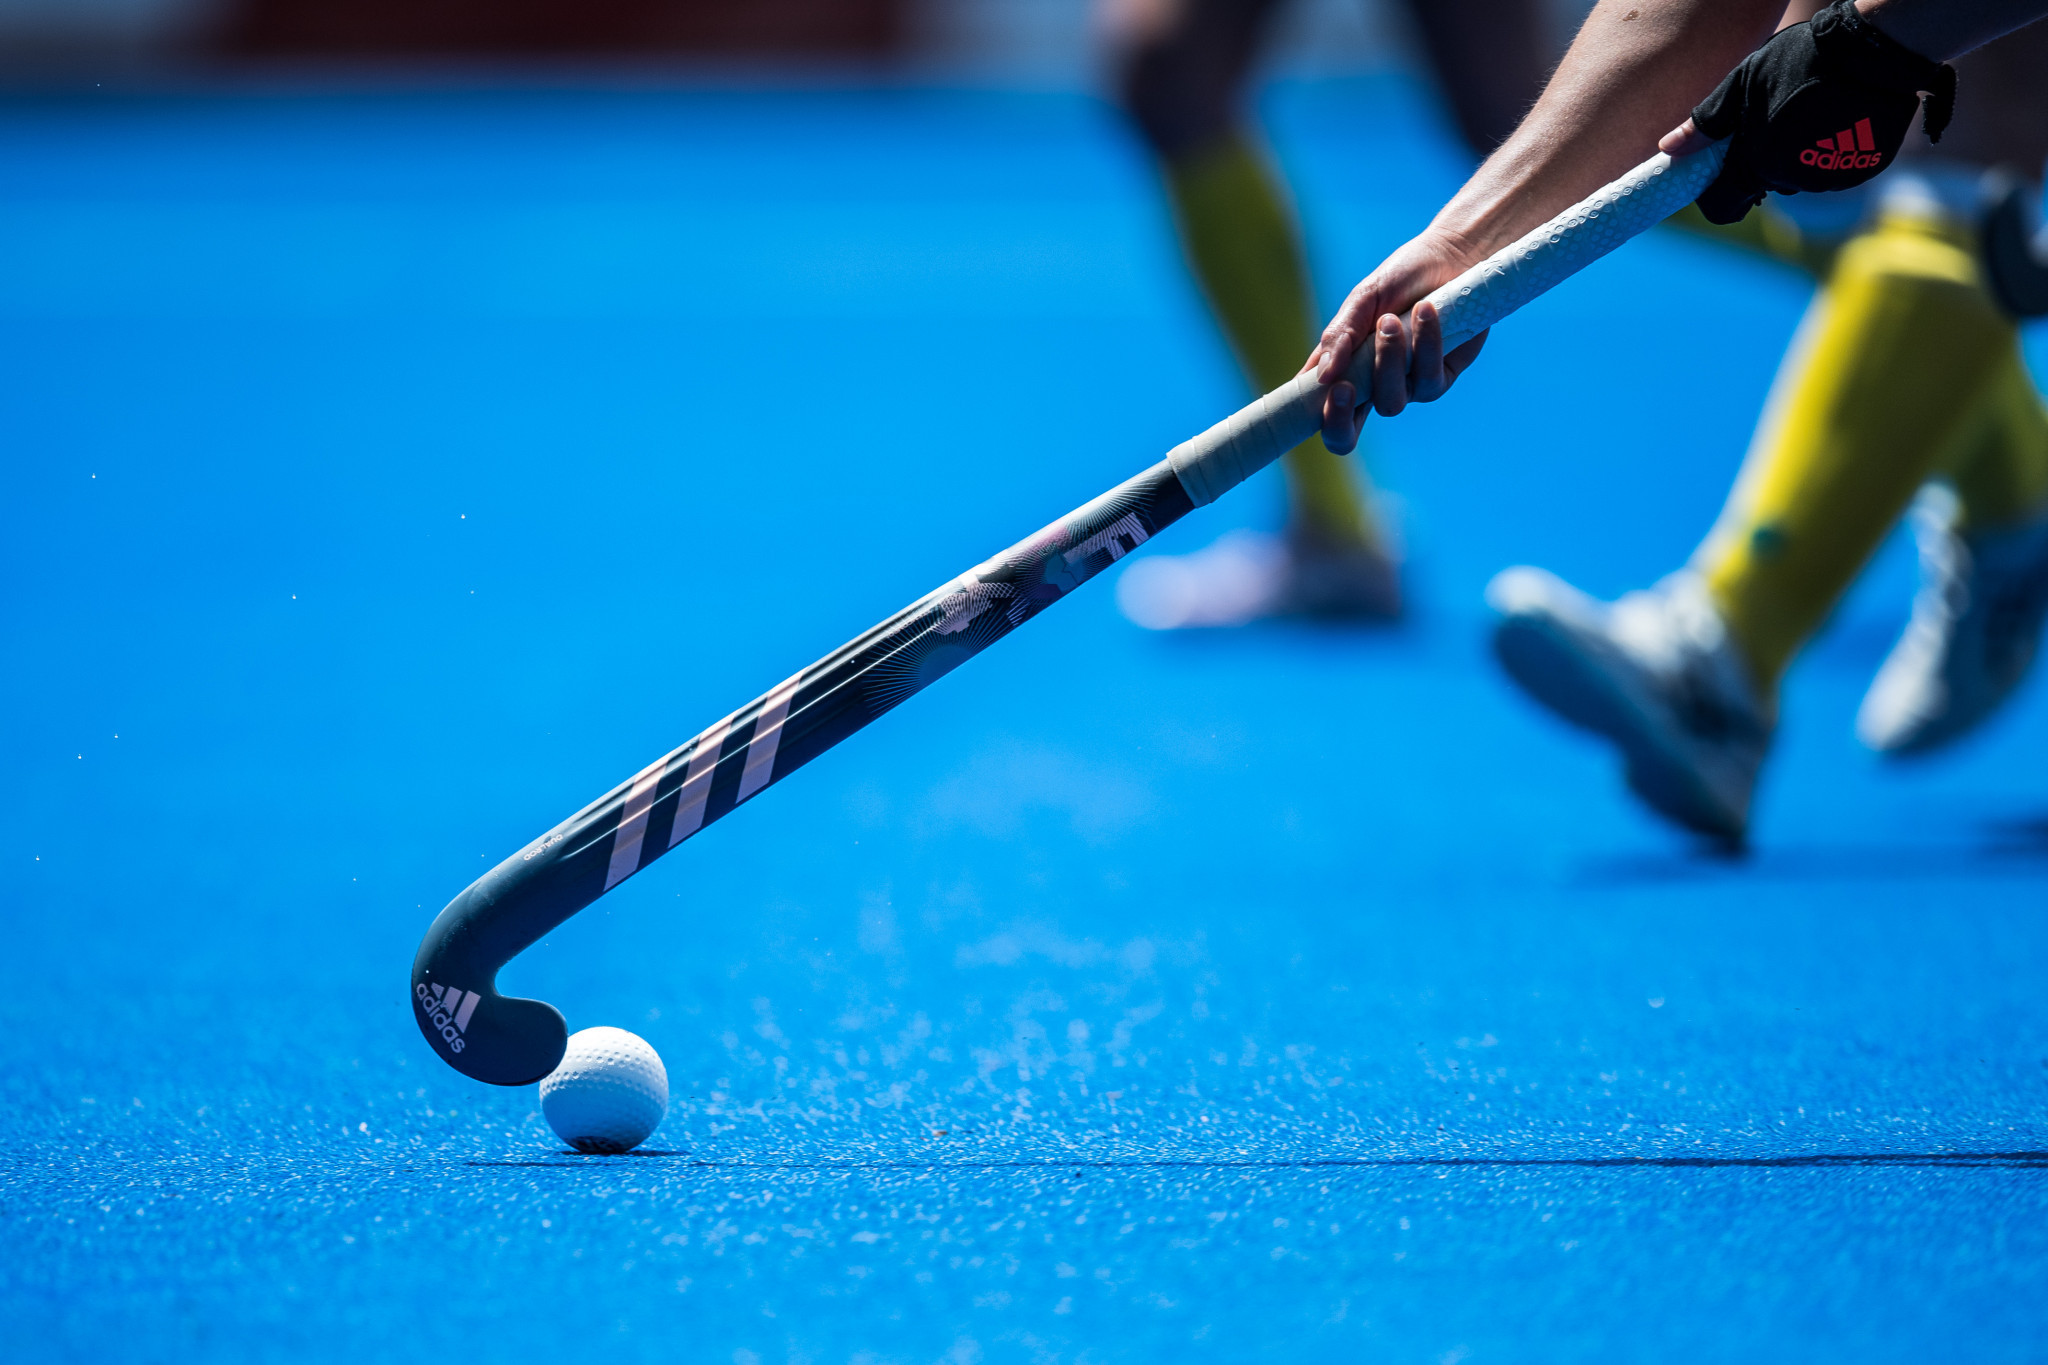 The Santiago 2023 hockey venue has been cleared for use by athletes ©Getty Images